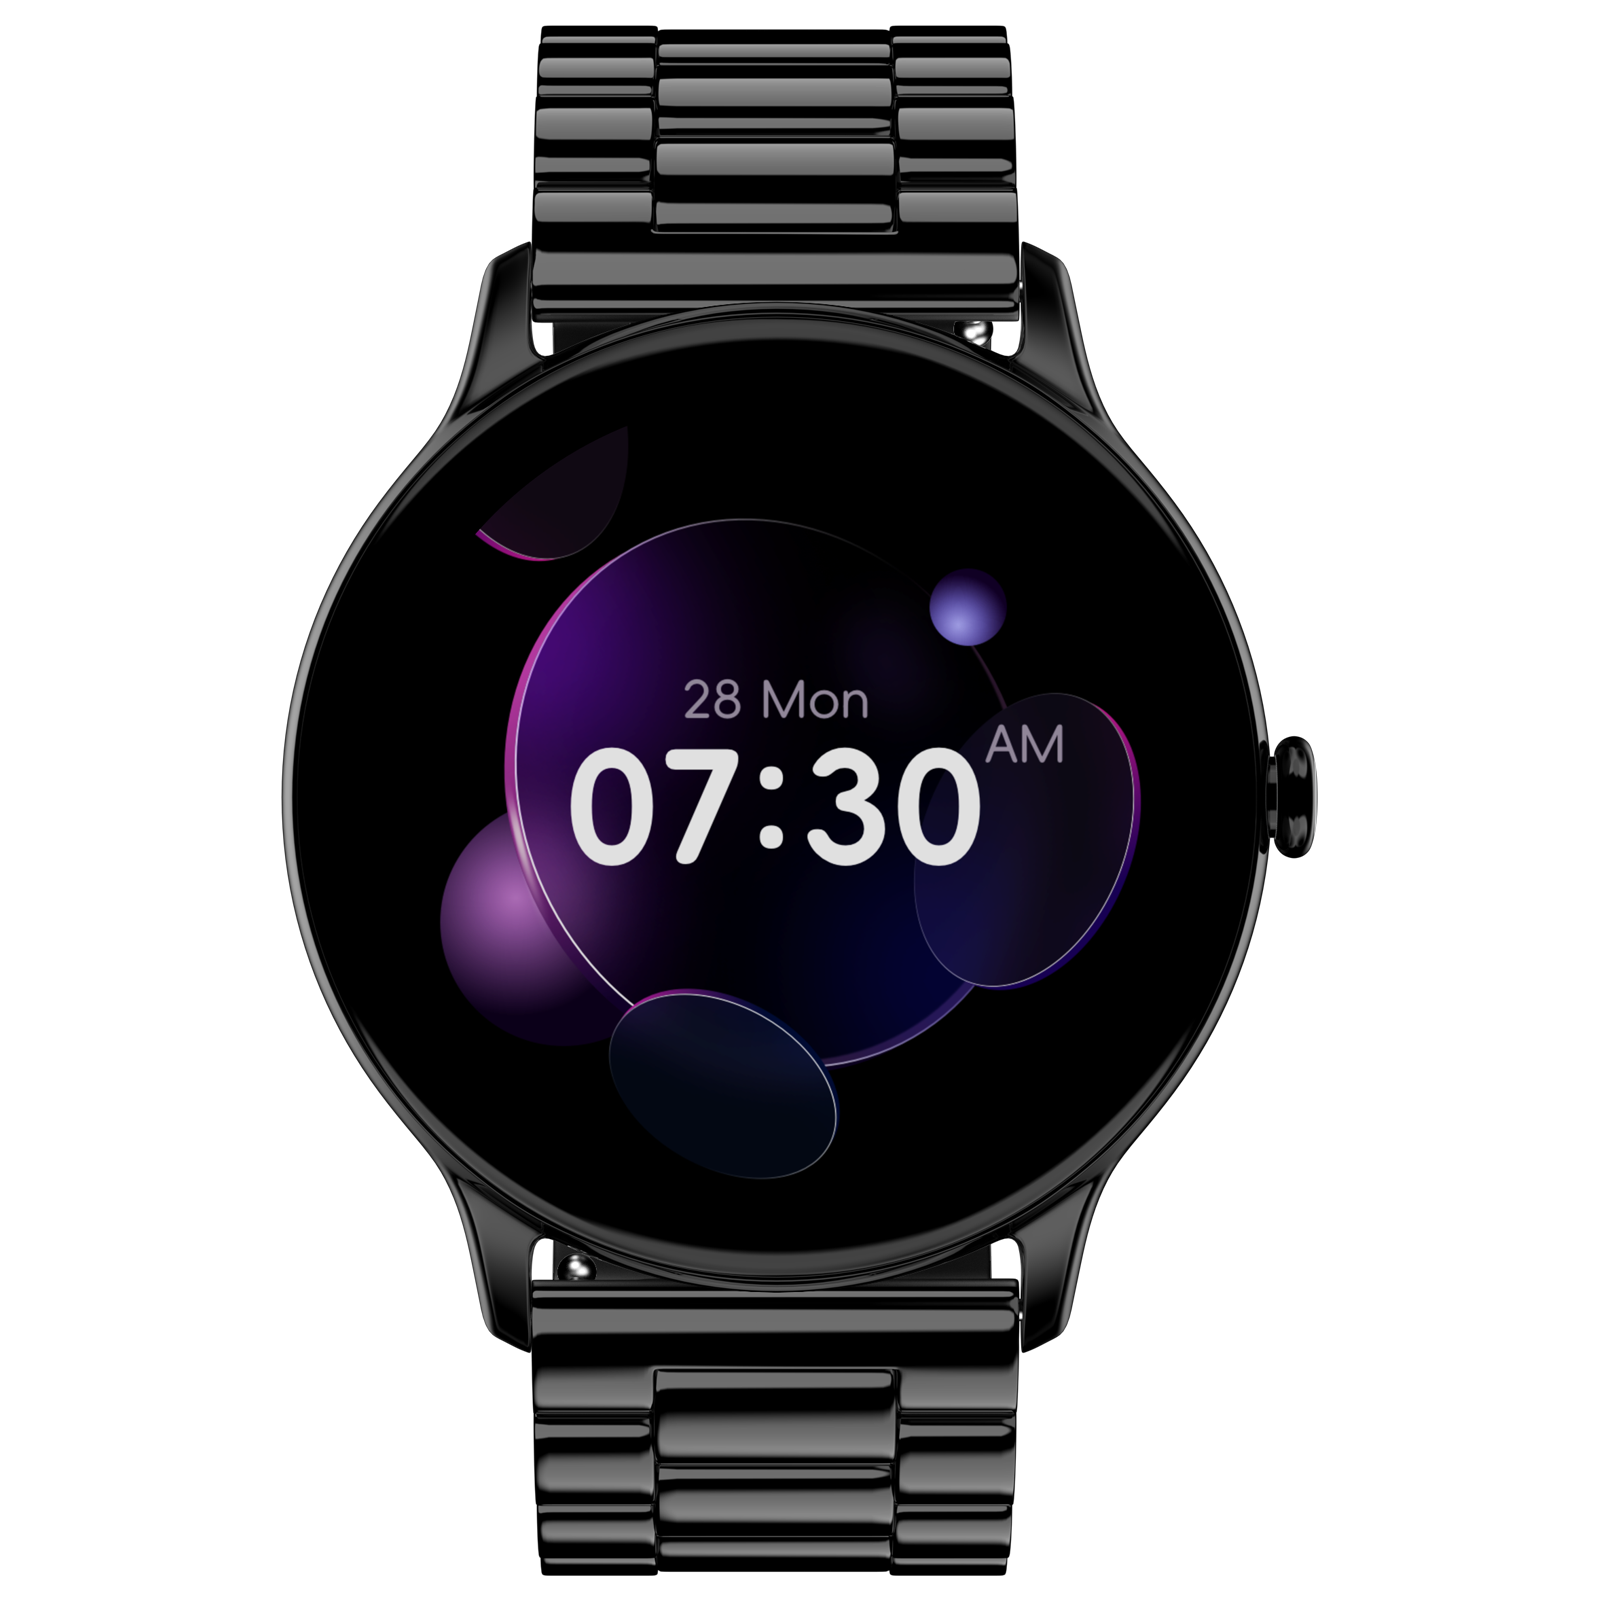 noise Twist Go Smartwatch with Bluetooth Calling (35mm TFT Display, IP67 Water Resistant, Elite Black Strap)